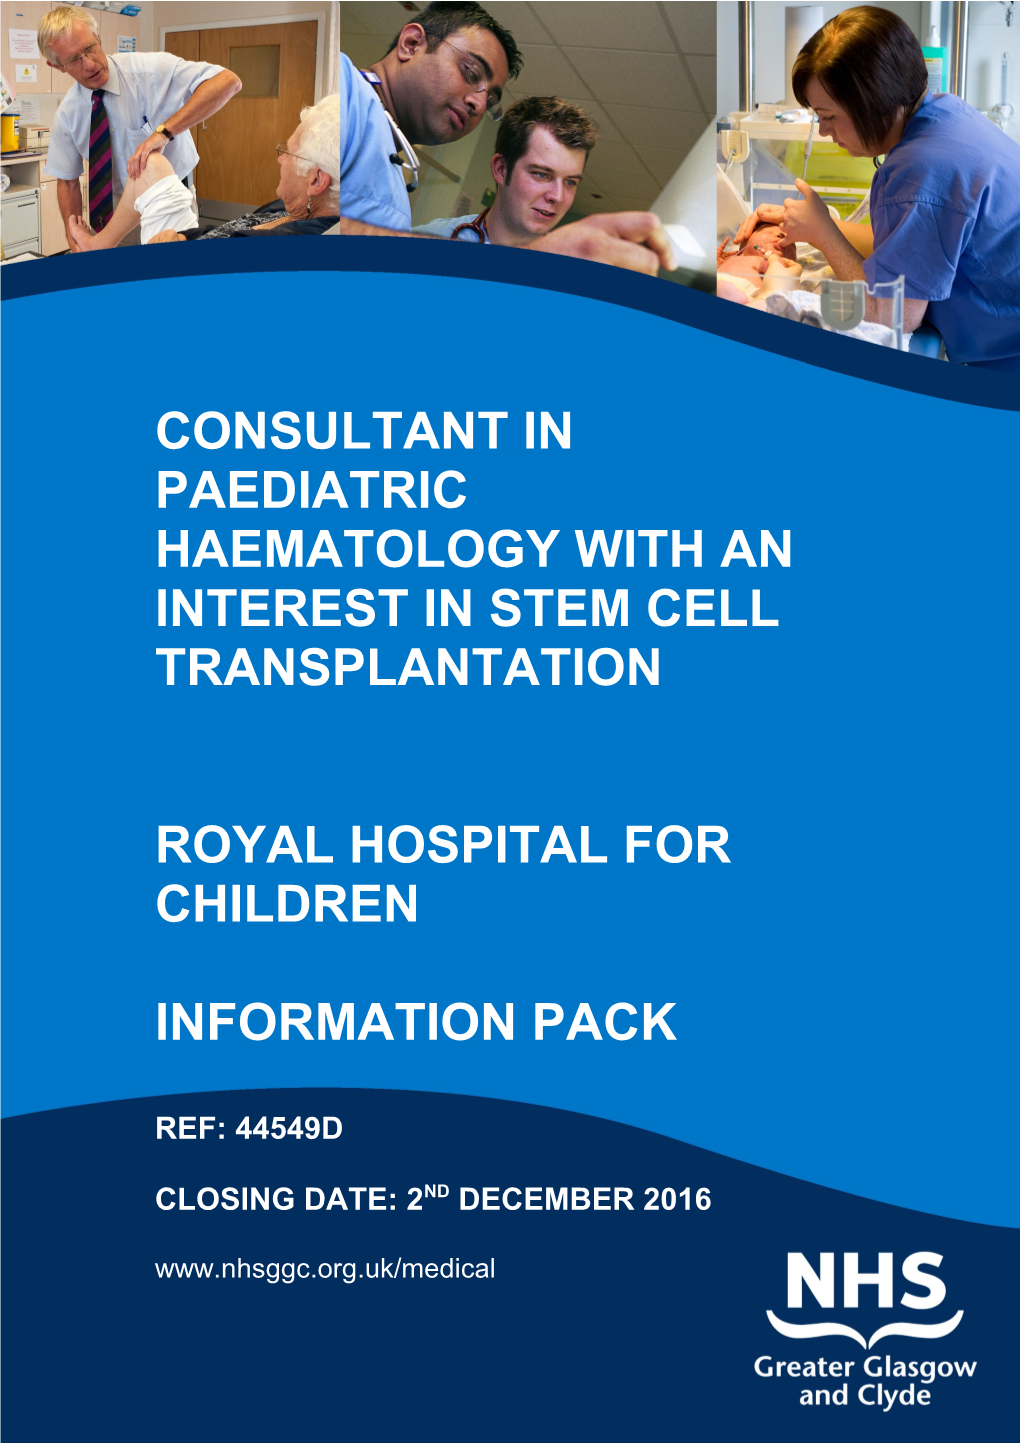 Consultant in Paediatric Haematology with an Interest in Stem Cell Transplantation